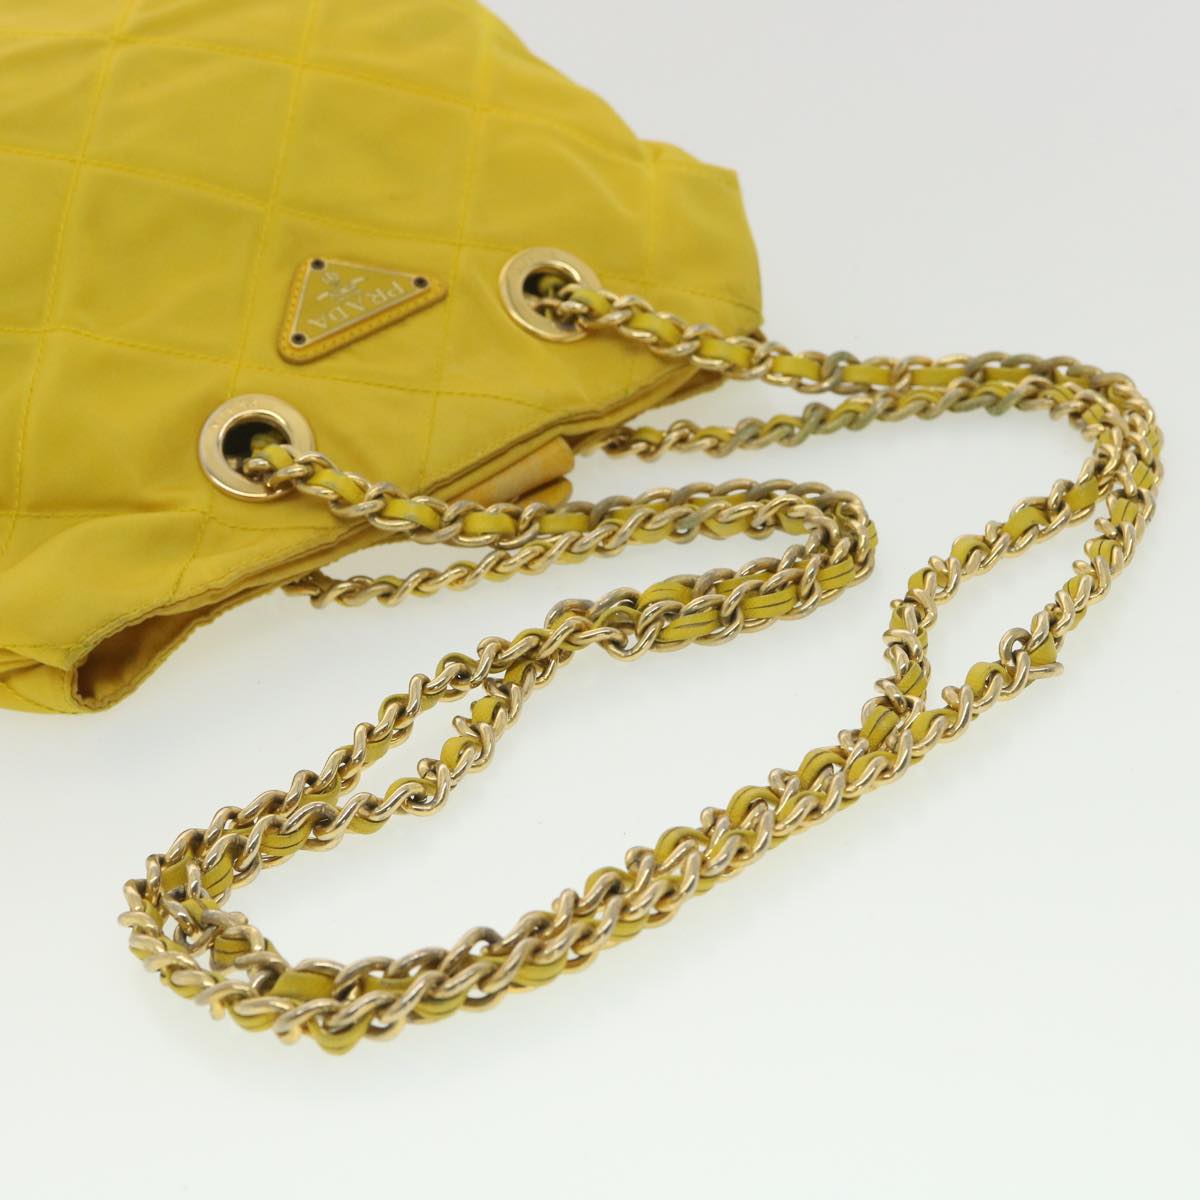 PRADA Nylon Quilted Chain Shoulder Bag Yellow Auth 34271